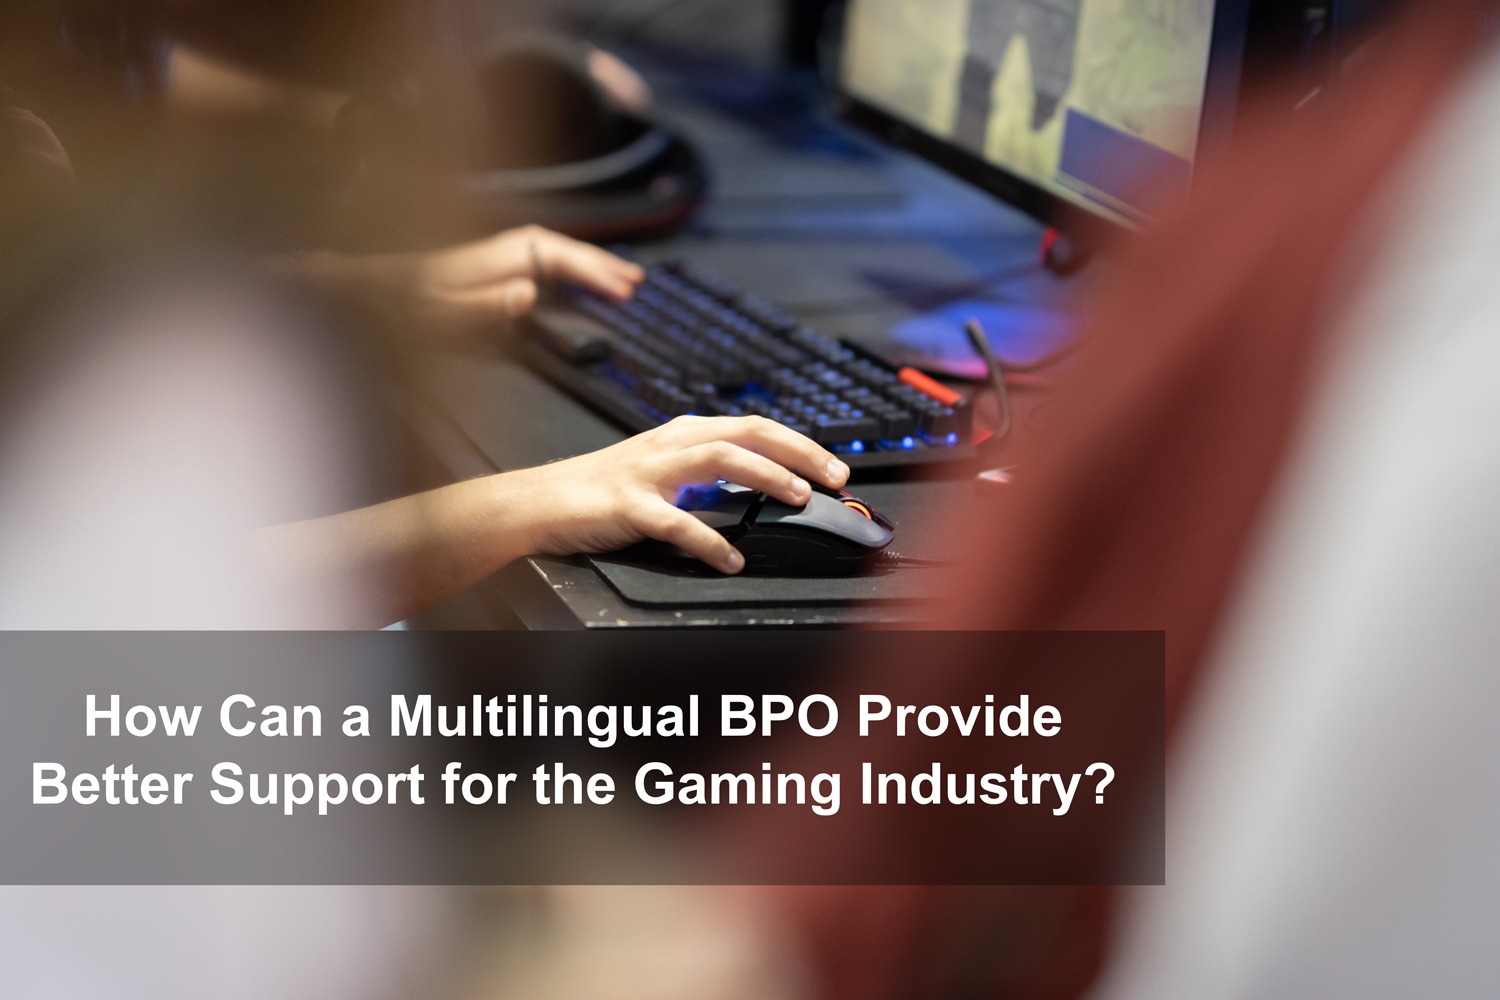 How can a multilingual BPO provide better support for the gaming industry?